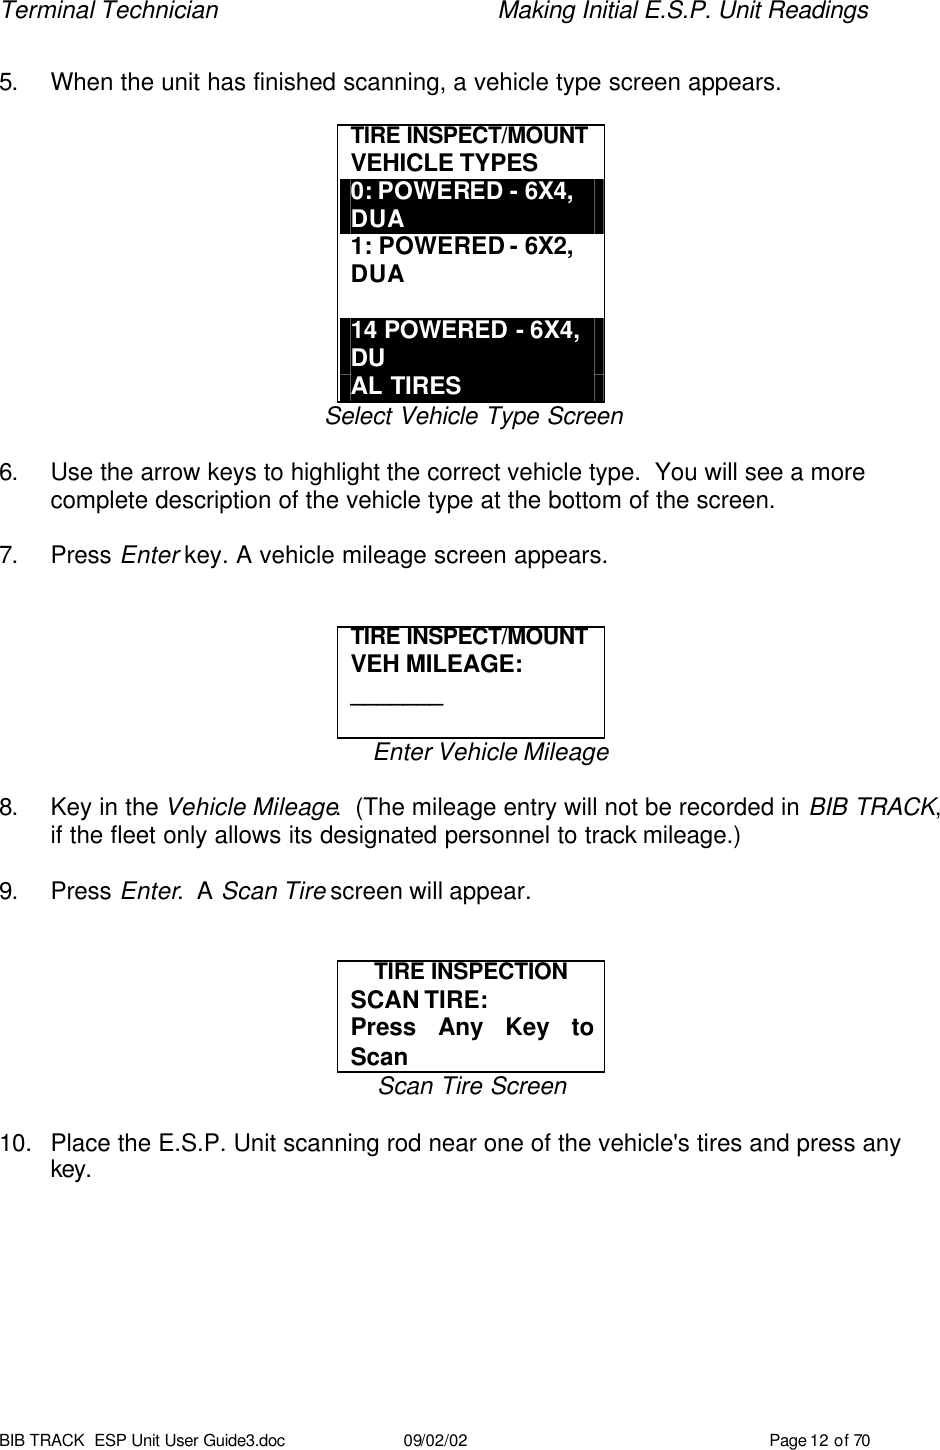 Terminal Technician    Making Initial E.S.P. Unit Readings BIB TRACK  ESP Unit User Guide3.doc 09/02/02 Page 12 of 70  5. When the unit has finished scanning, a vehicle type screen appears.  TIRE INSPECT/MOUNT  VEHICLE TYPES 0: POWERED - 6X4, DUA 1: POWERED - 6X2, DUA  14 POWERED - 6X4, DU AL TIRES Select Vehicle Type Screen  6. Use the arrow keys to highlight the correct vehicle type.  You will see a more complete description of the vehicle type at the bottom of the screen.  7. Press Enter key. A vehicle mileage screen appears.   TIRE INSPECT/MOUNT  VEH MILEAGE: _______  Enter Vehicle Mileage  8. Key in the Vehicle Mileage.  (The mileage entry will not be recorded in BIB TRACK, if the fleet only allows its designated personnel to track mileage.)  9. Press Enter.  A Scan Tire screen will appear.   TIRE INSPECTION SCAN TIRE: Press Any Key to Scan Scan Tire Screen  10. Place the E.S.P. Unit scanning rod near one of the vehicle&apos;s tires and press any key. 